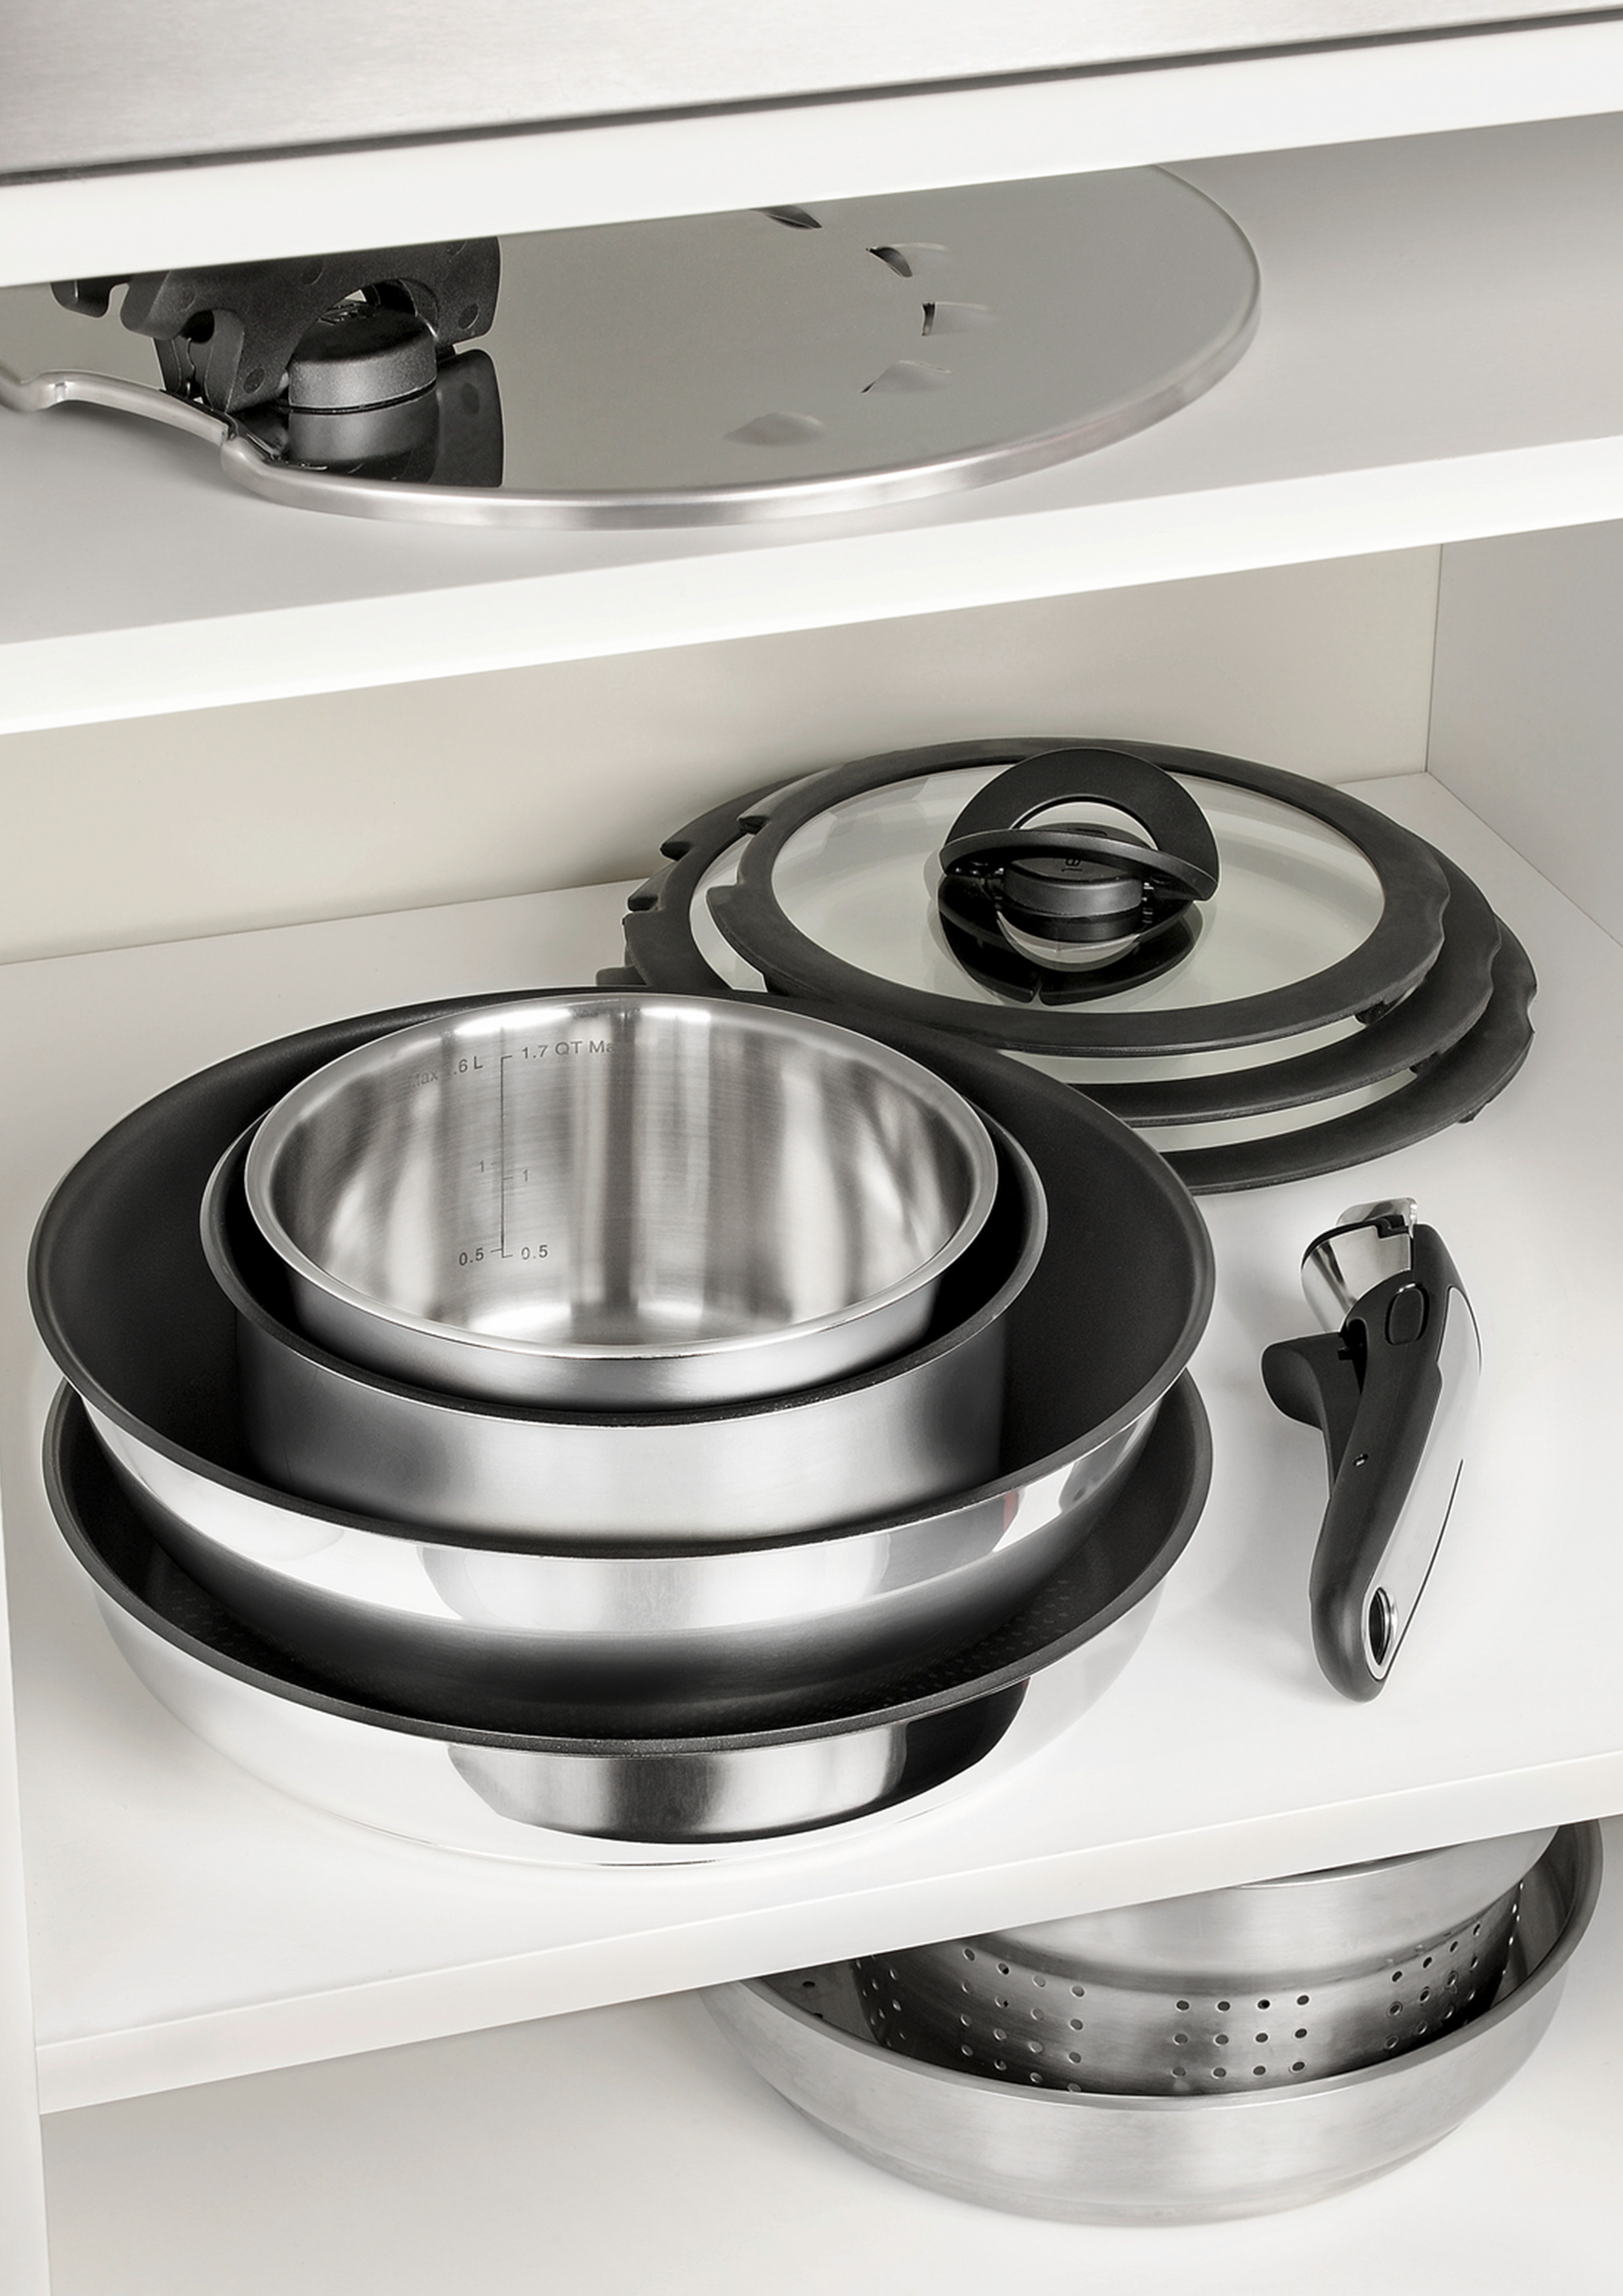 https://cdn.yournet.space/good-design.org/2020/Product%20Design/Housewares%20and%20Objects/2629-Tefal%20Ingenio%20Preference%20Stainless%20Steel%2013pc%20Set/Tefal%20Ingenio%20Preference%20Stainless%20Steel%2013pc%20Set%202.jpg